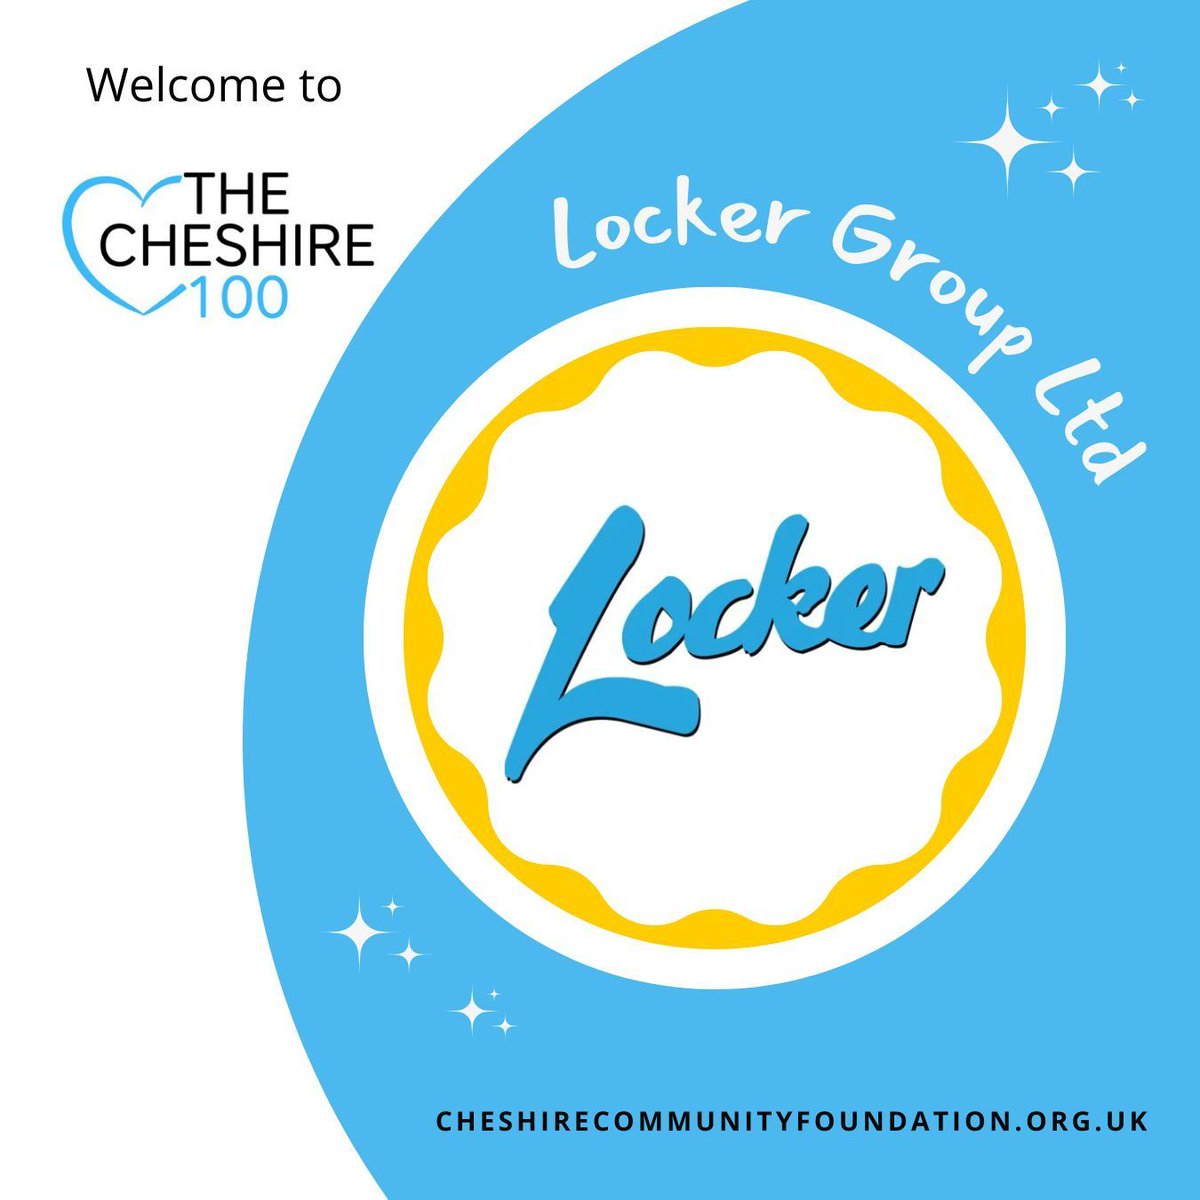 Welcome to the Cheshire 100 Supporters Club @thelockergroup ⭐ Our donors allow CCF to build a happier, fairer and stronger county for all. Thank you so much for your support! #CCf #Cheshire #Cheshire100 buff.ly/3CREKEq